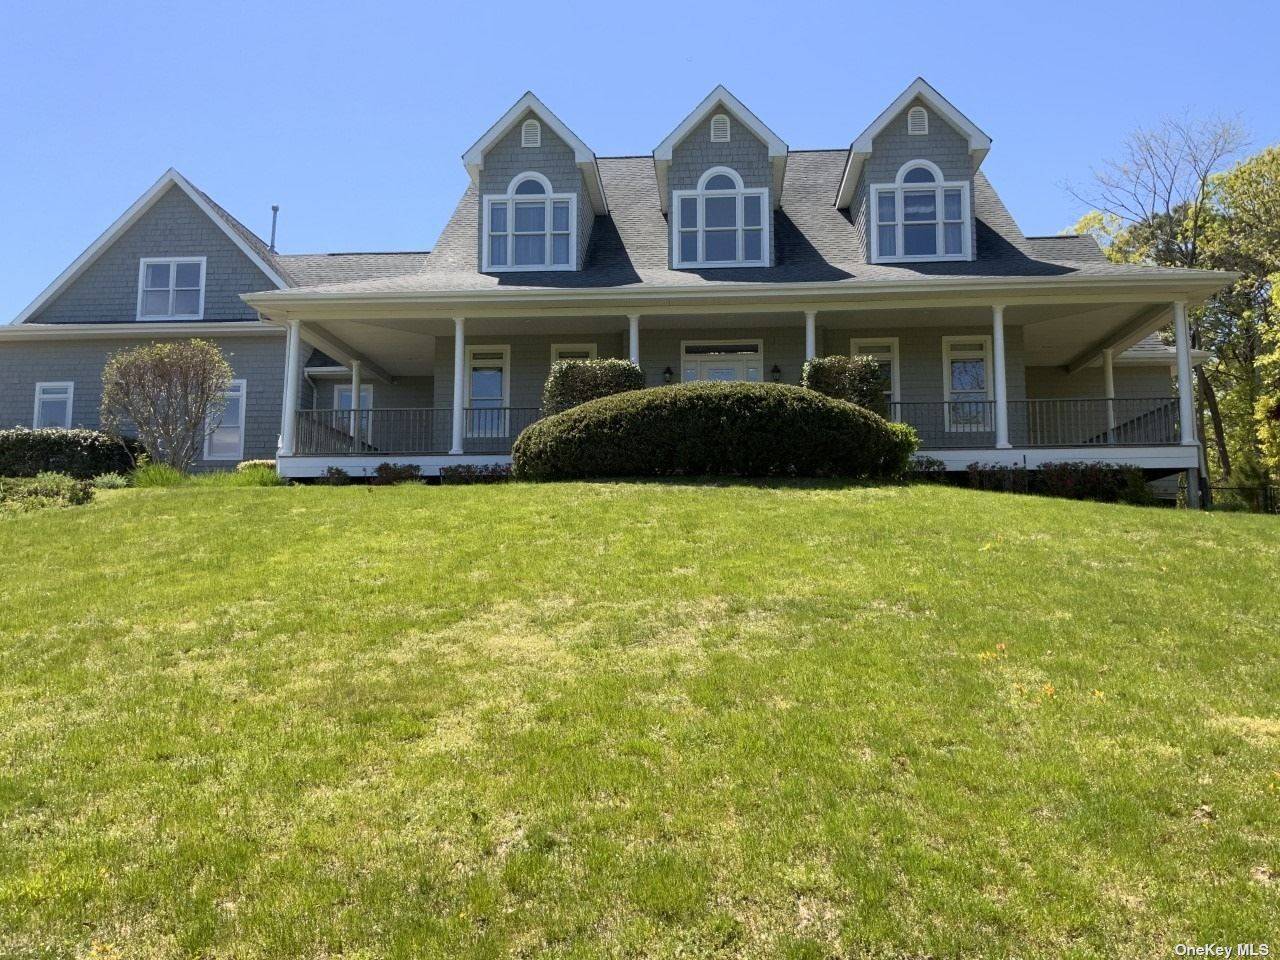 Light filled majestic 5 Bedroom, 4 bath home set up on a Hill in prestigious Southampton Pines.